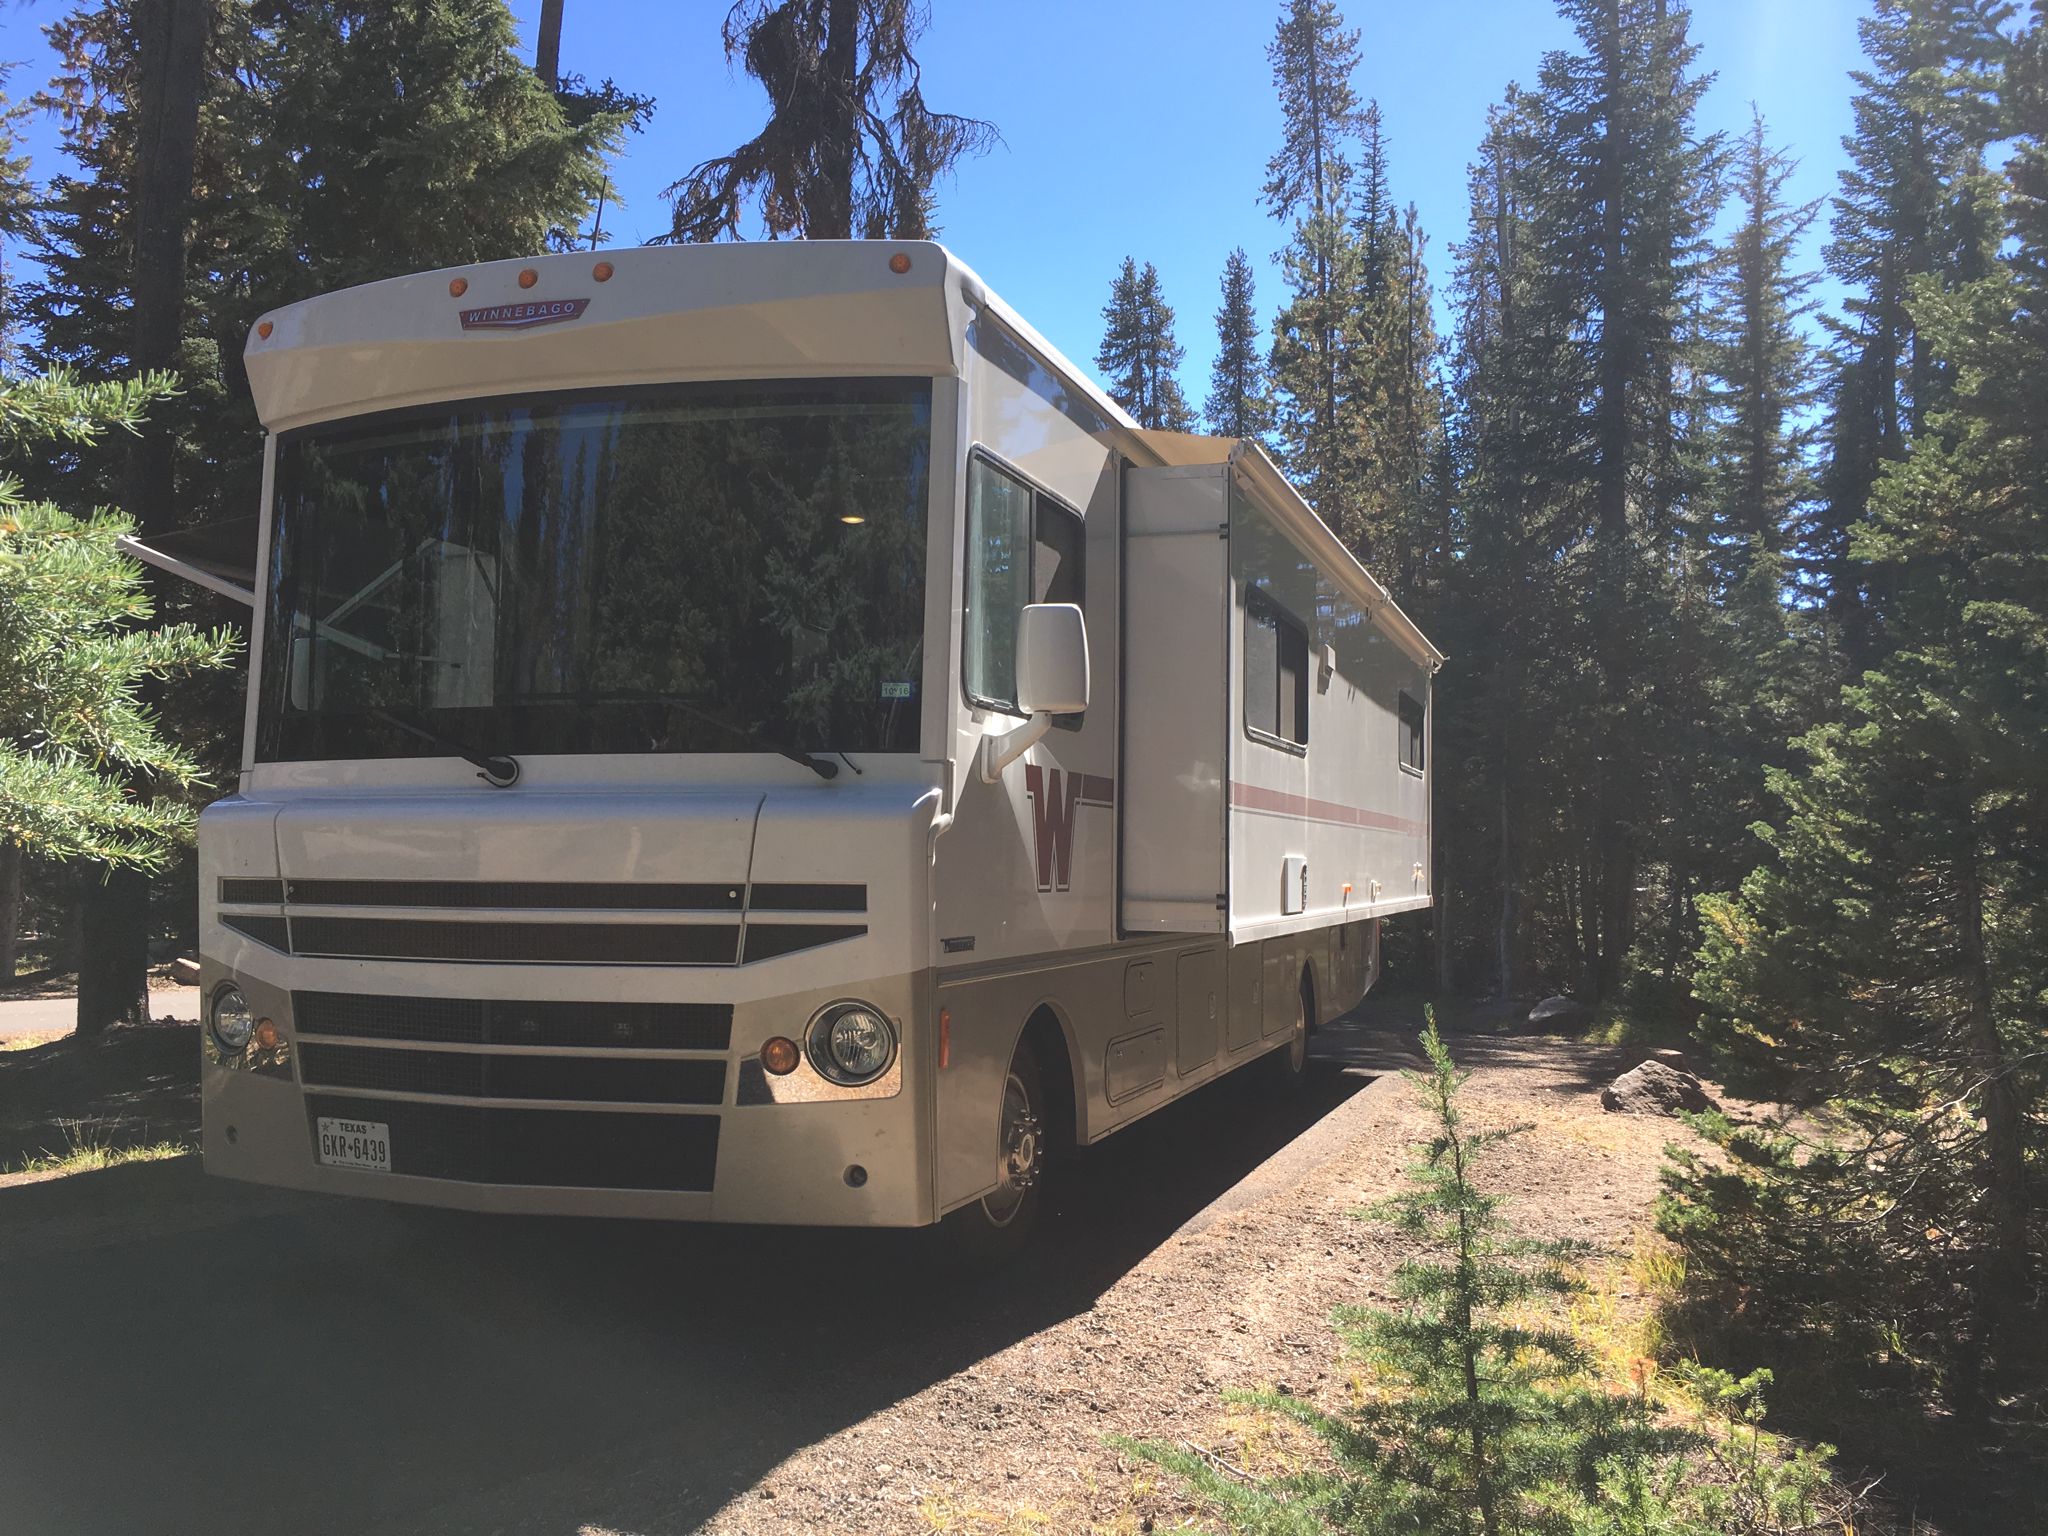 Winnebago Brave parked at campsite surrounded by trees.